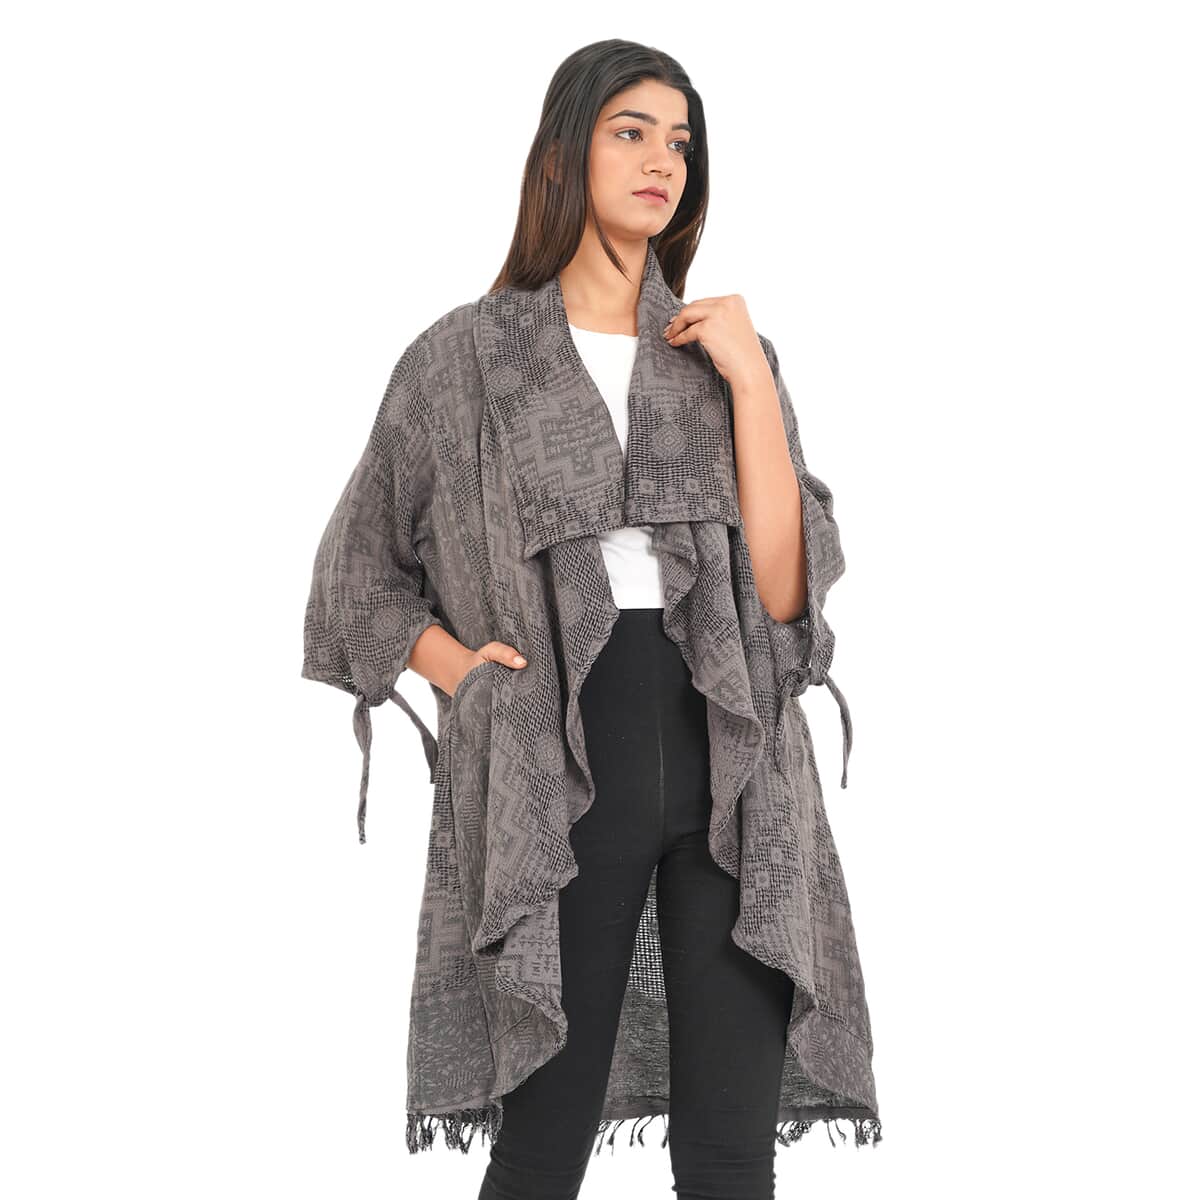 Passage Gray 100% Cotton Double Layer Jacquard Front Waterfall Cardigan - One size Missy, Cotton Cardigan, Women Cardigan, Maxi Cardigan, Summer Cardigan image number 2